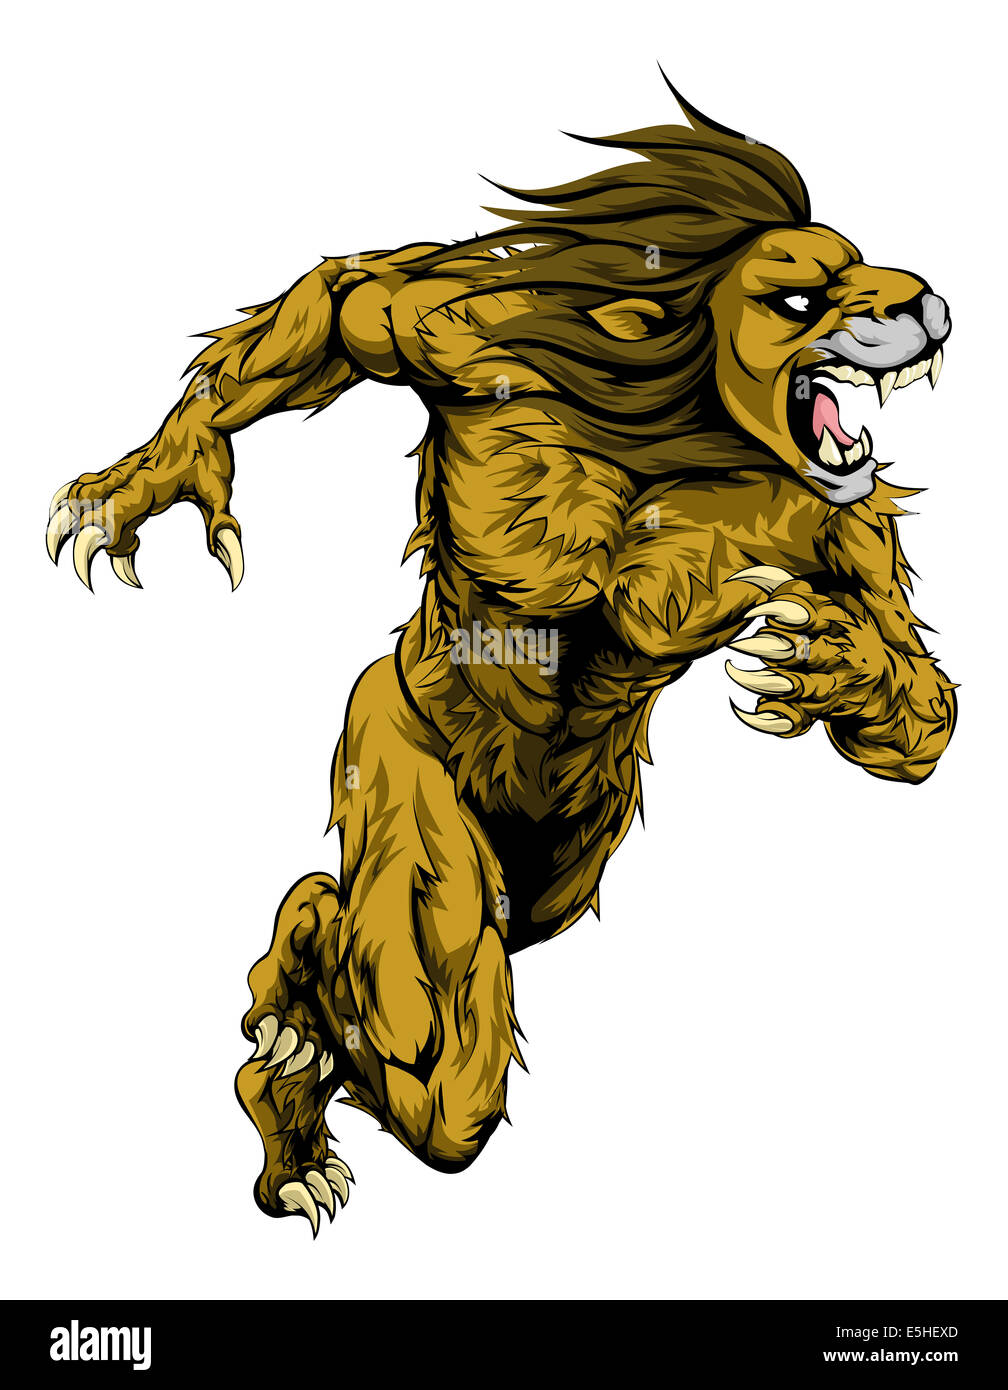 A lion man character or sports mascot charging, sprinting or running Stock Photo